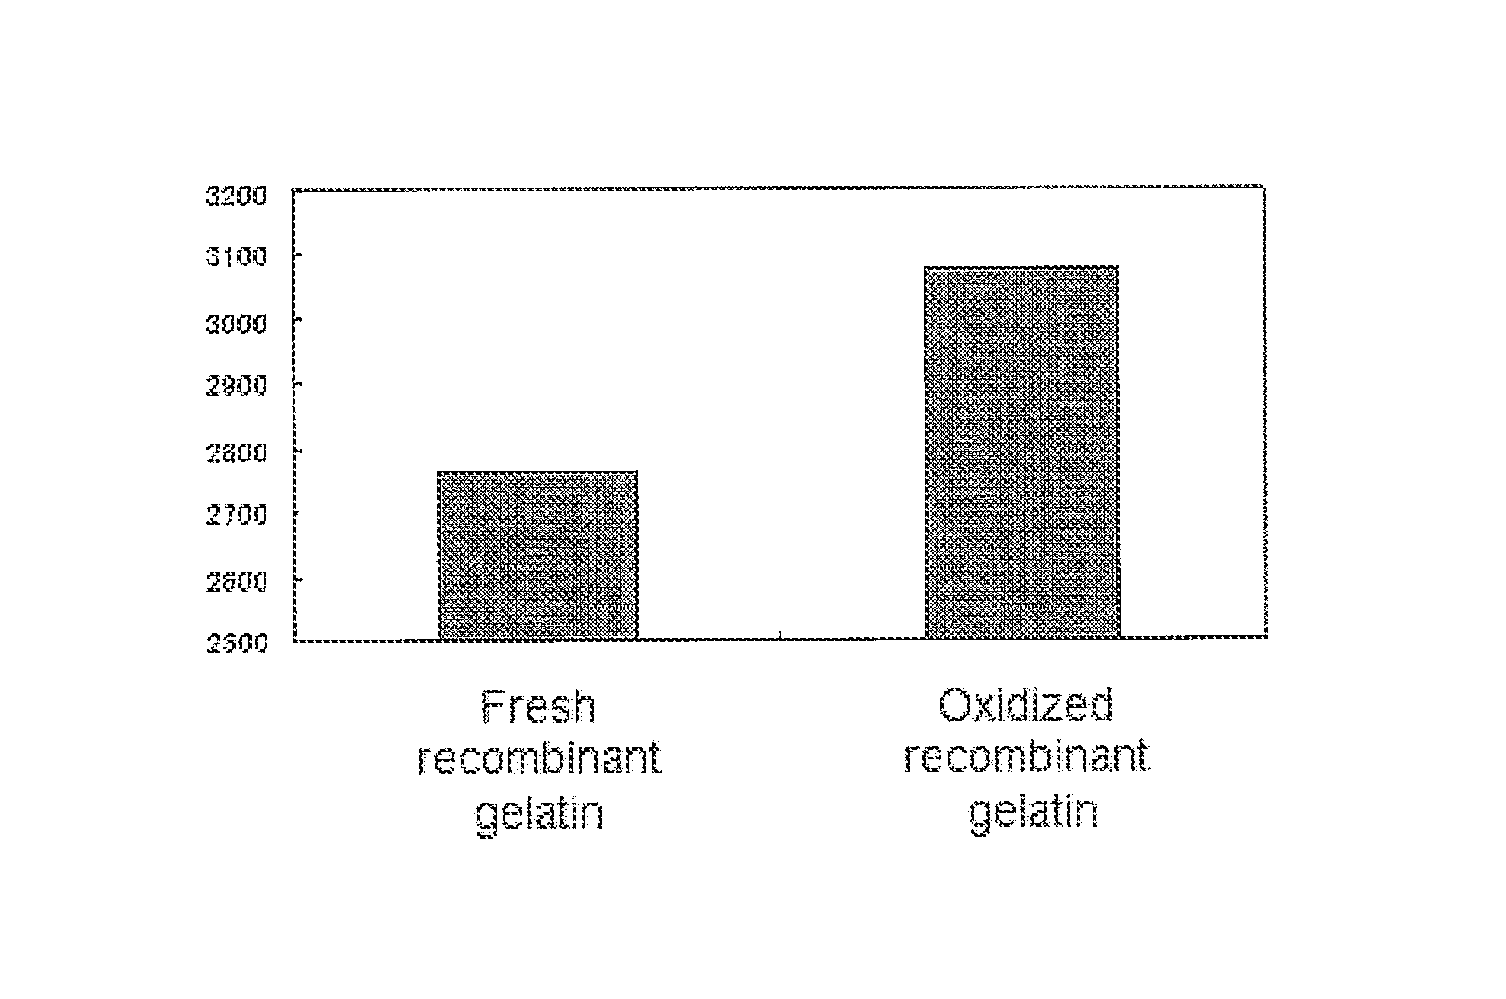 Cell-adhesive protein